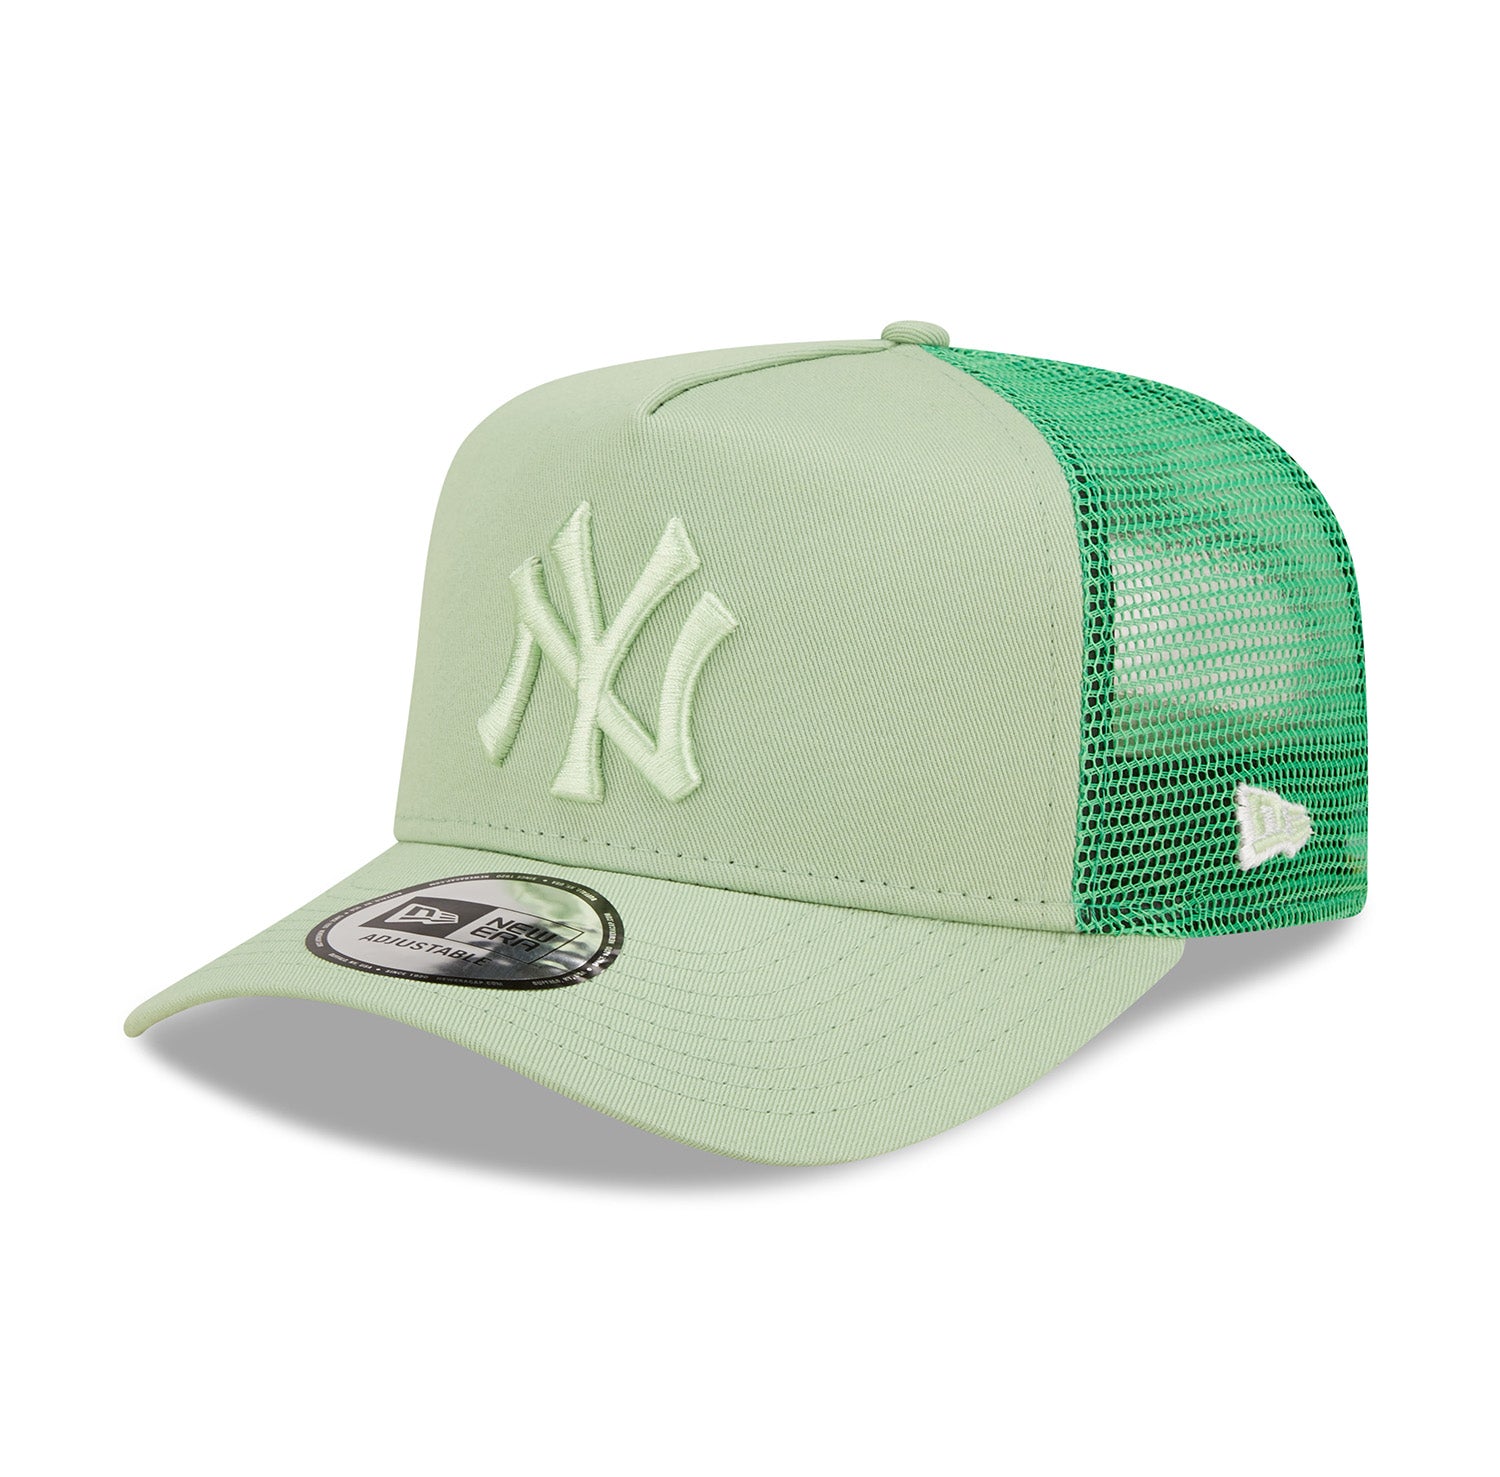 NY Yankees New Trucker Cap light green JustFitteds